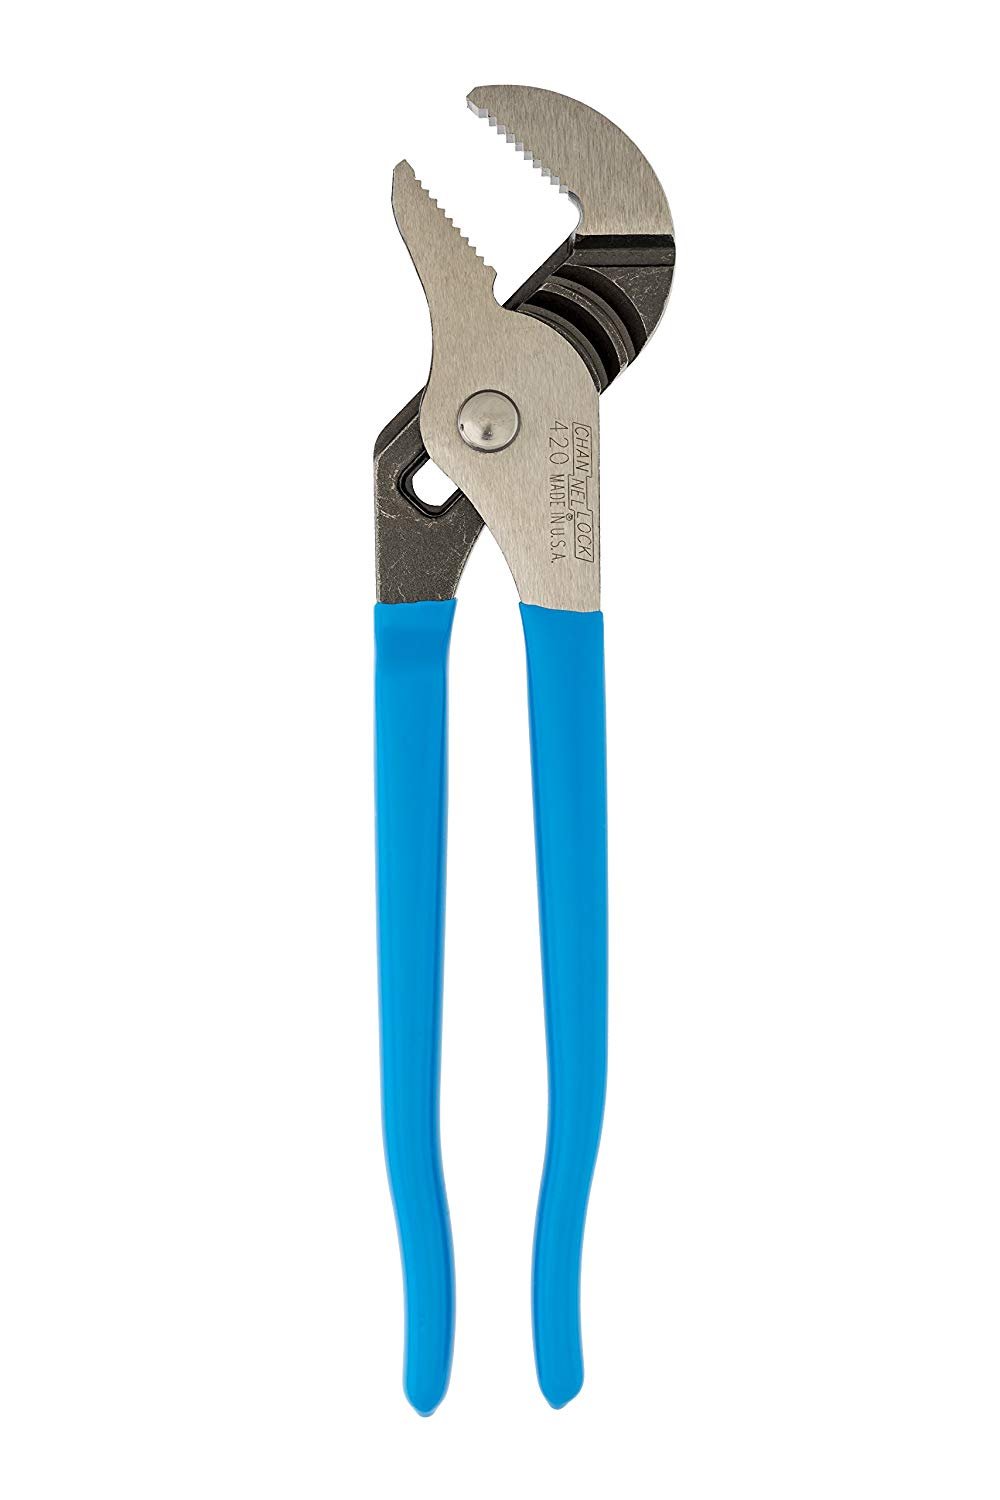 ChannelLock 420 - 9.5" Straight Jaw Tongue & Groove Plie